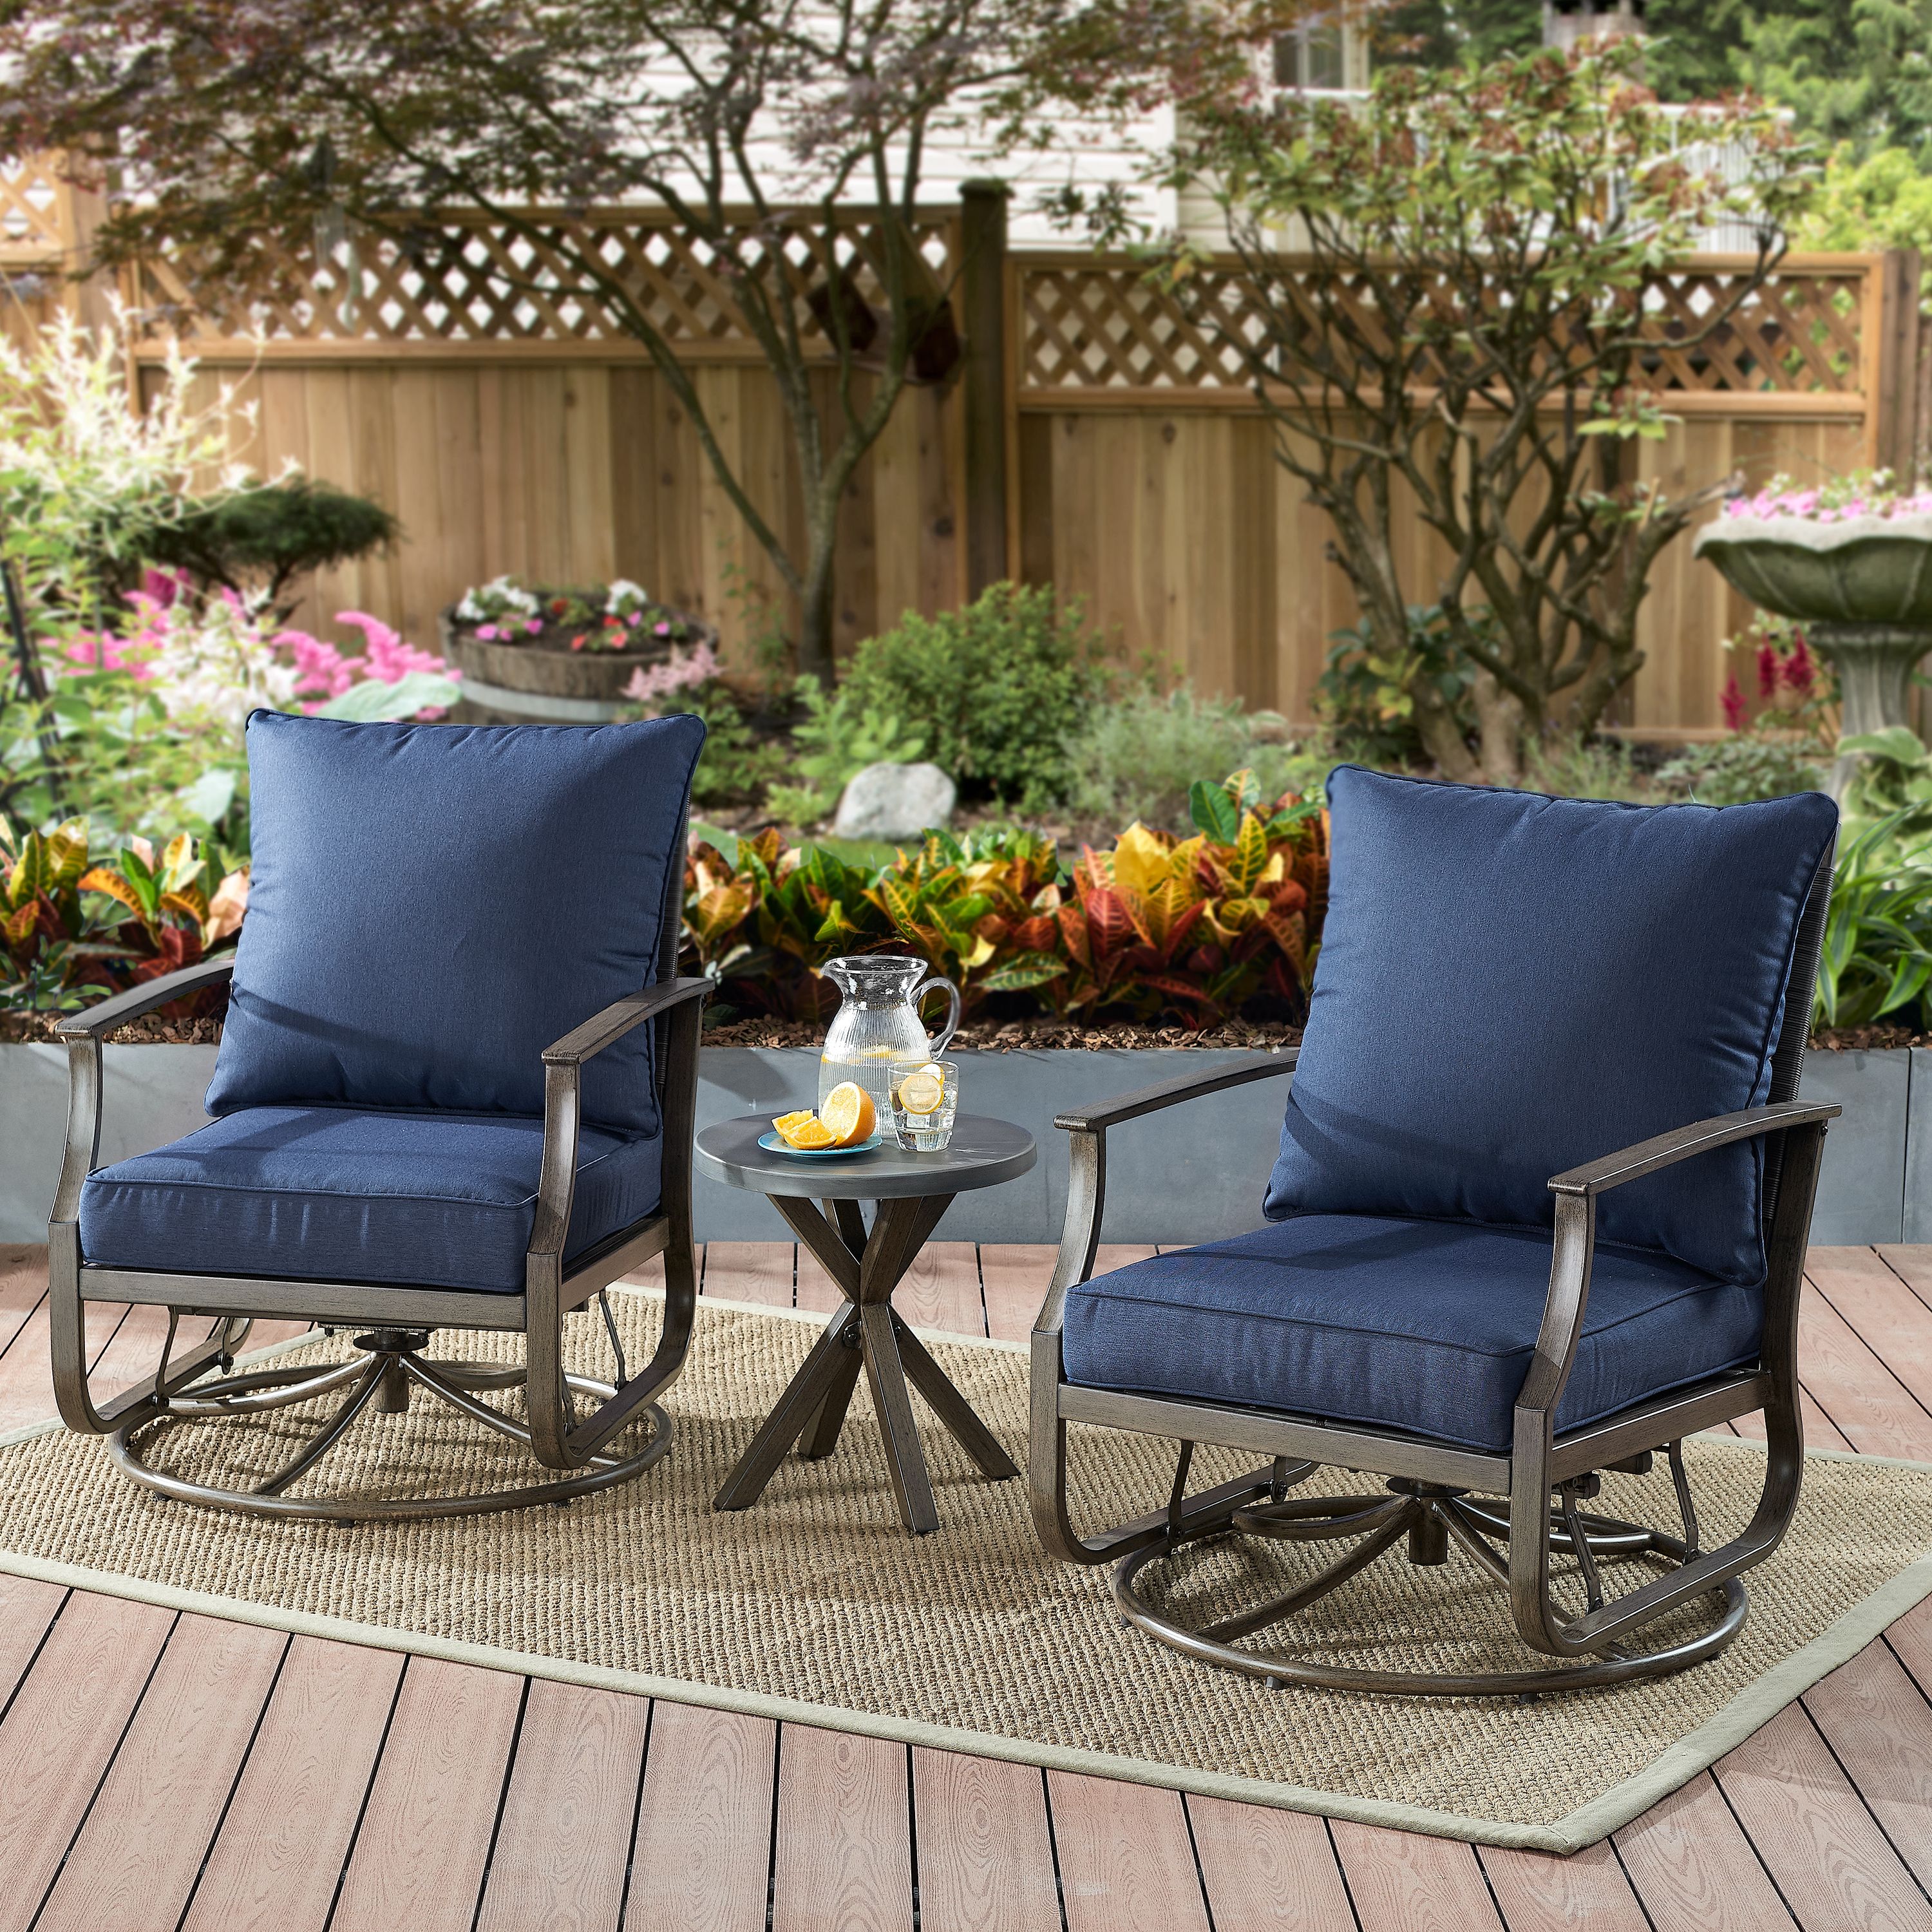 Better Homes & Gardens Chauncey 3-Piece Patio Chat Set with Cushions